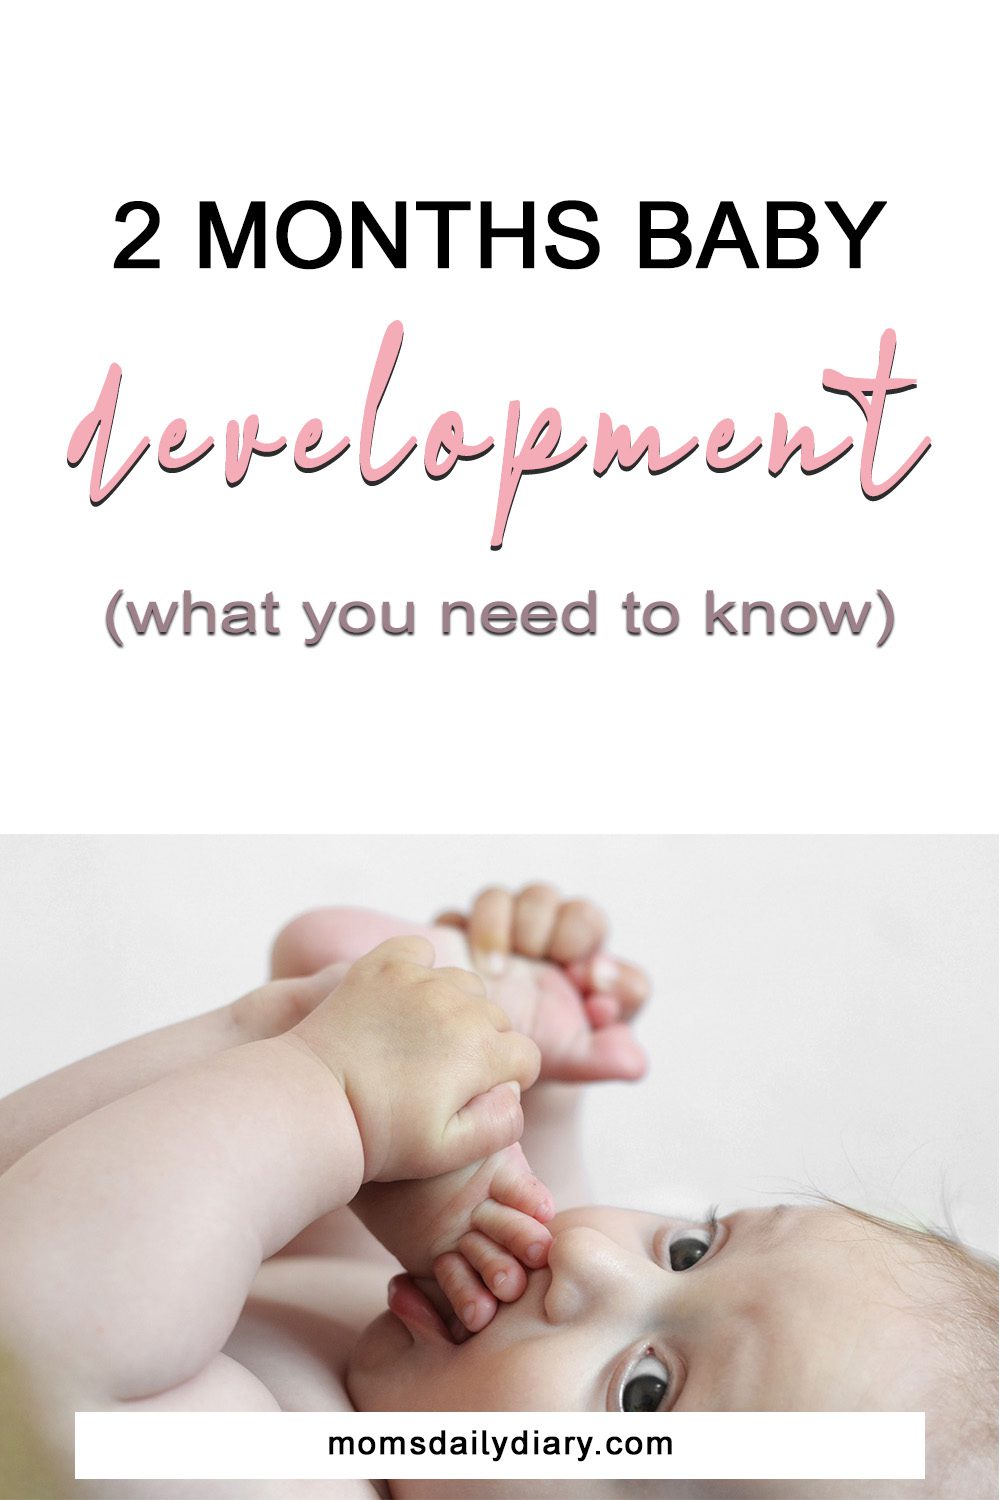 Everything about your 2-month-old is new, exciting, and a bit frightening. Here is what you can expect in terms of 2 months baby development.